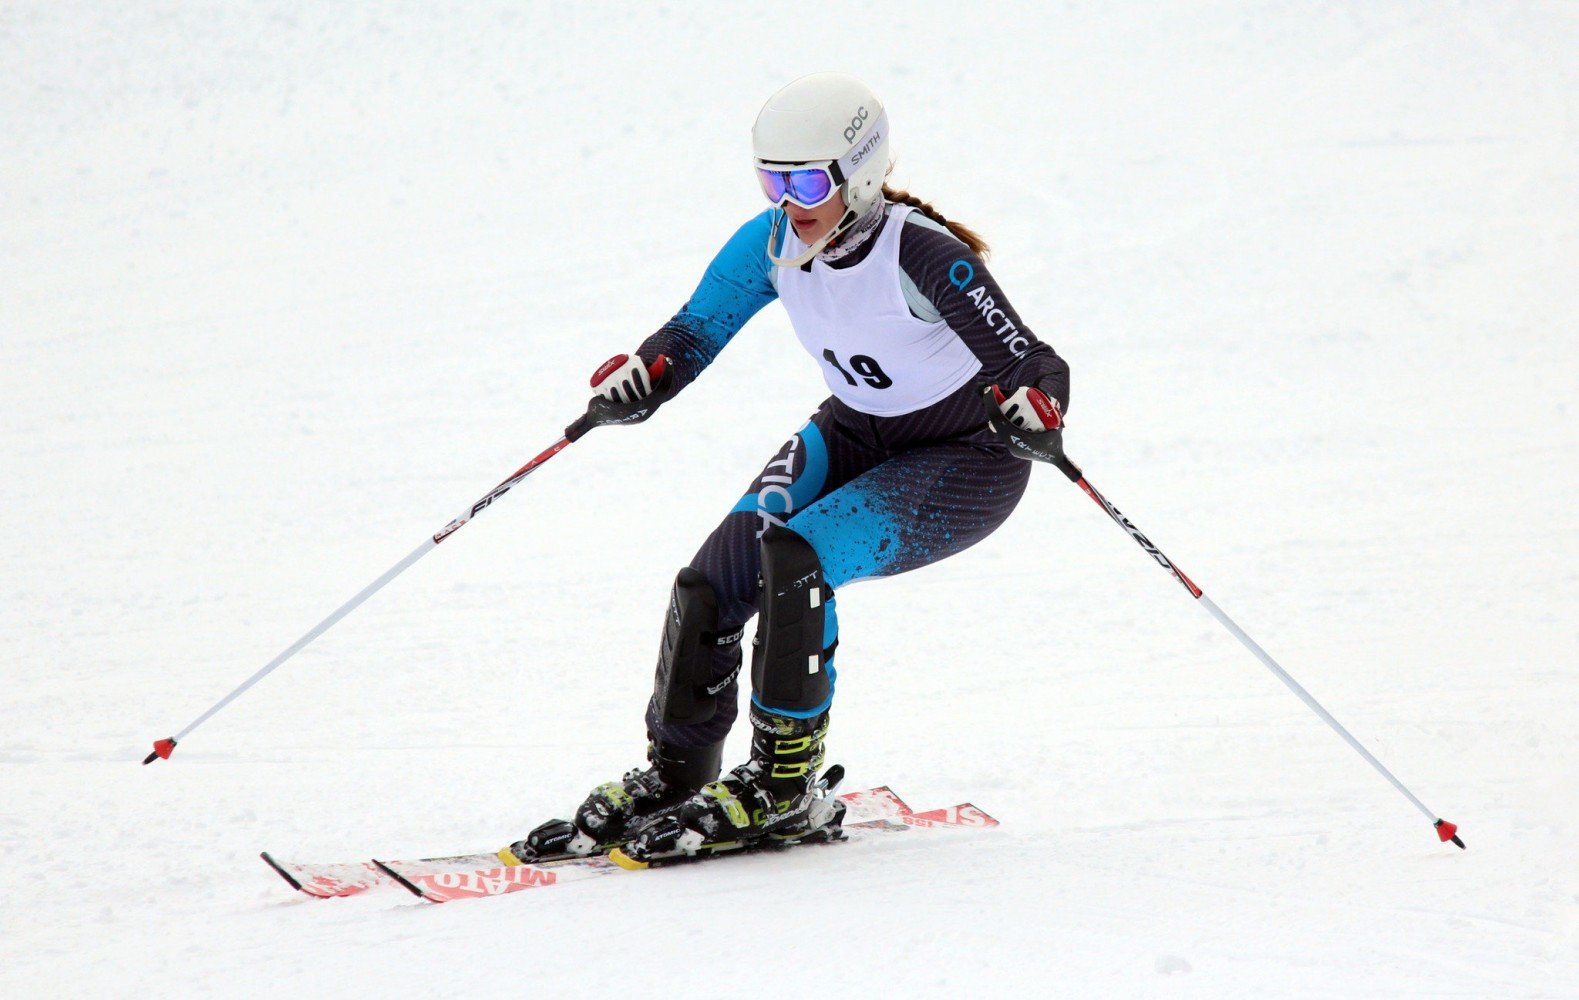 The Cup GS Speed Suit in blue is also a popular ski racing suit for girls.